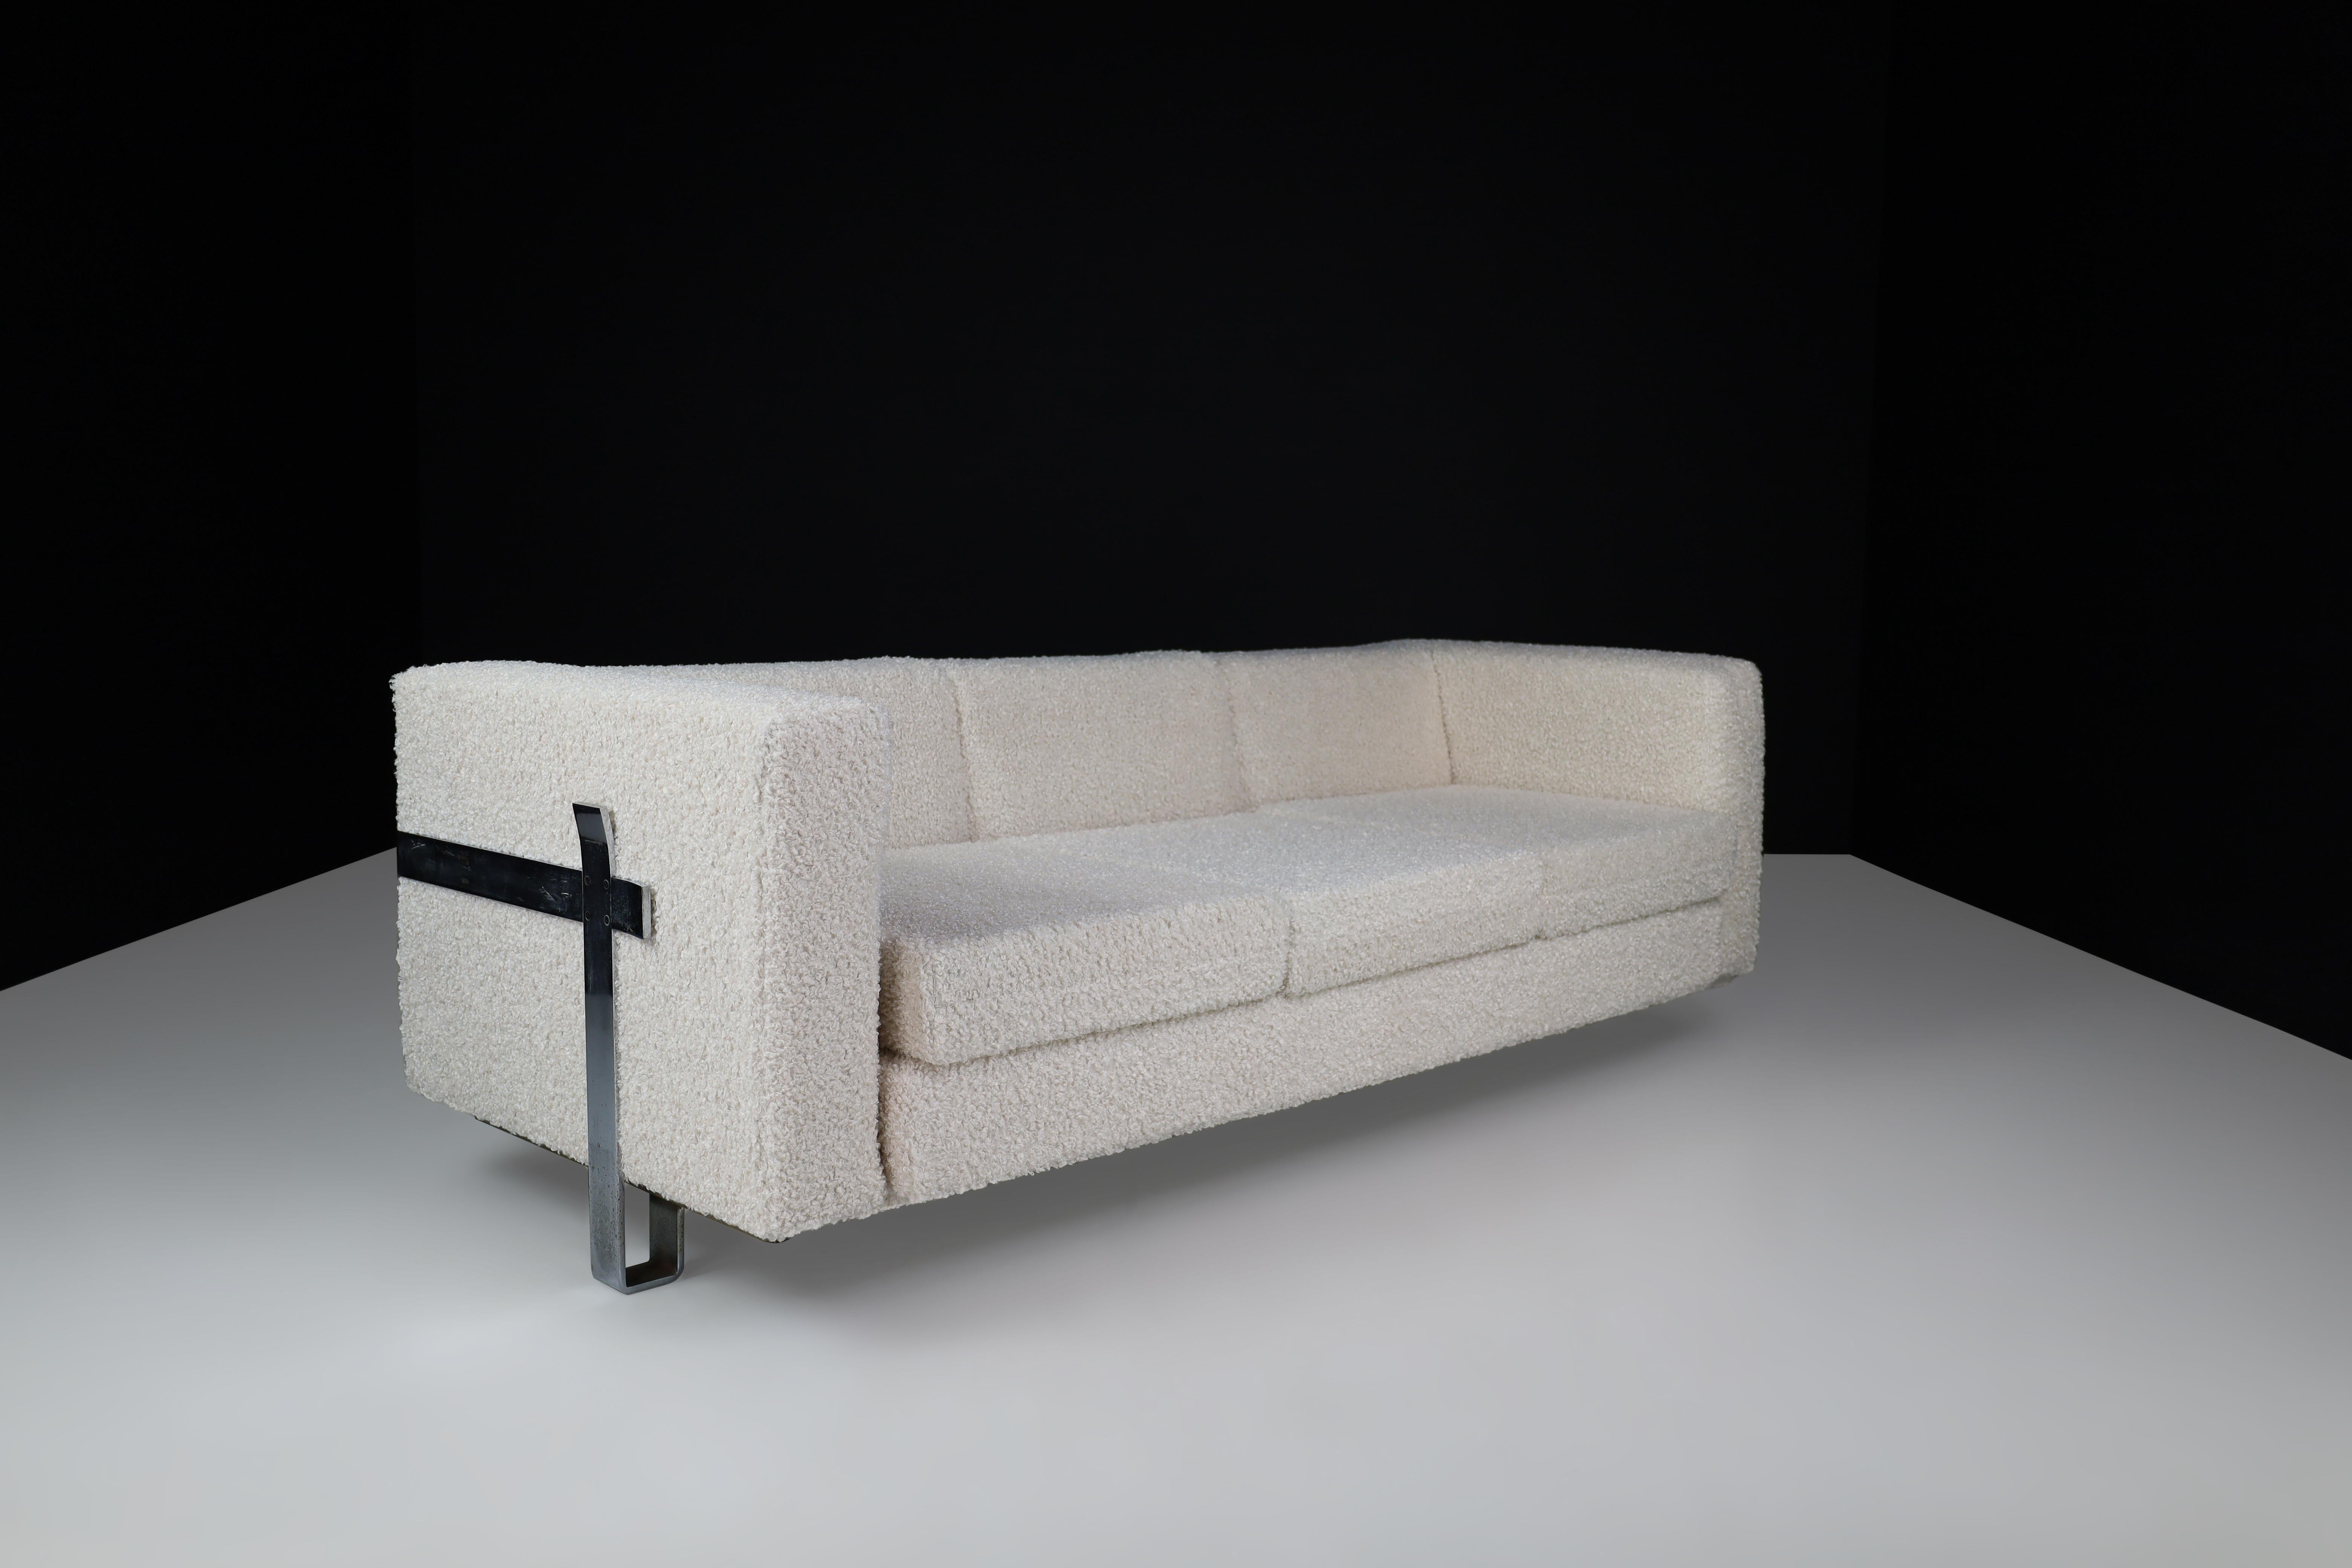 Mid century Fabric sofa designed by Luigi Caccia Dominioni for Azucena Italia , 1950s

This mid-century sofa, designed by Luigi Caccia Dominioni for Azucena Italia, is a stunning piece that demands attention. Upholstered in Bouclé and featuring